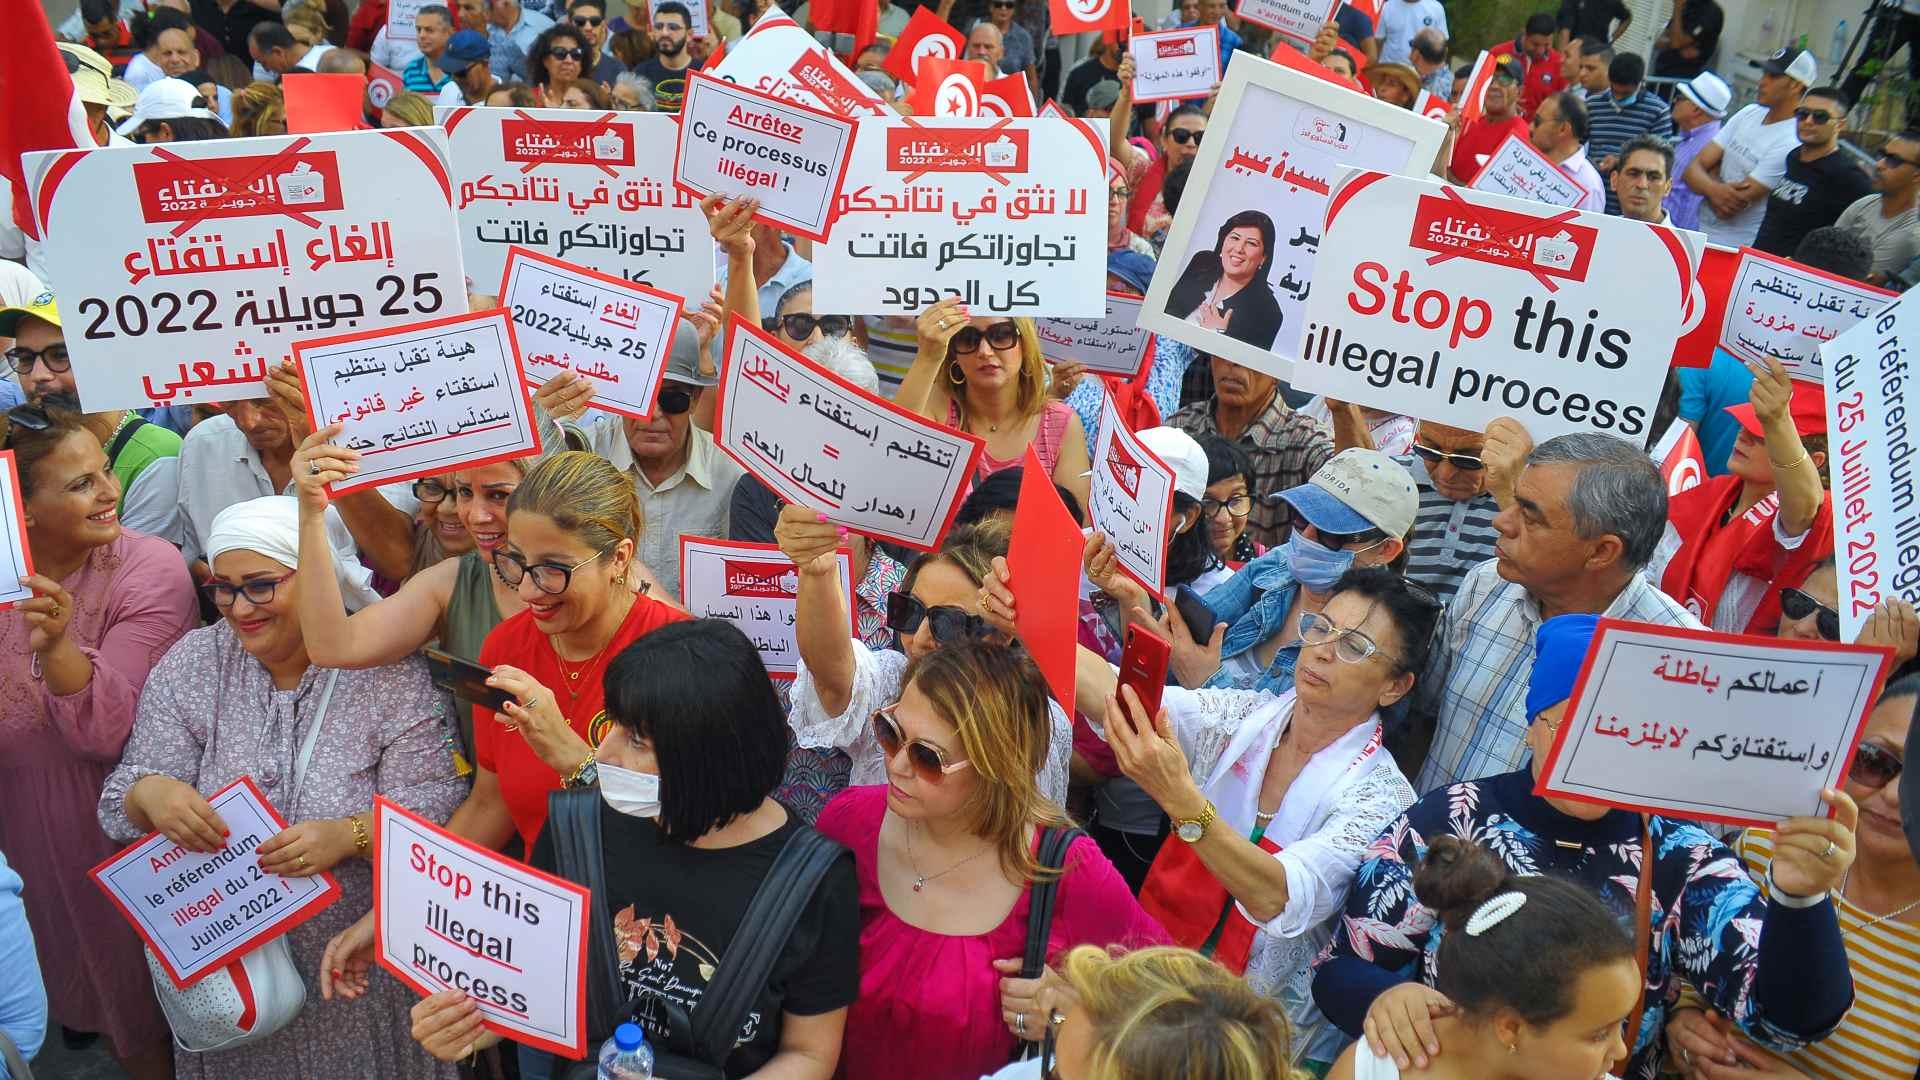 Supporters of the Free Destourian Party protest against the Tunisian President outside the Independent High Authority for Elections in the capital Tunis on 7 July 2022.